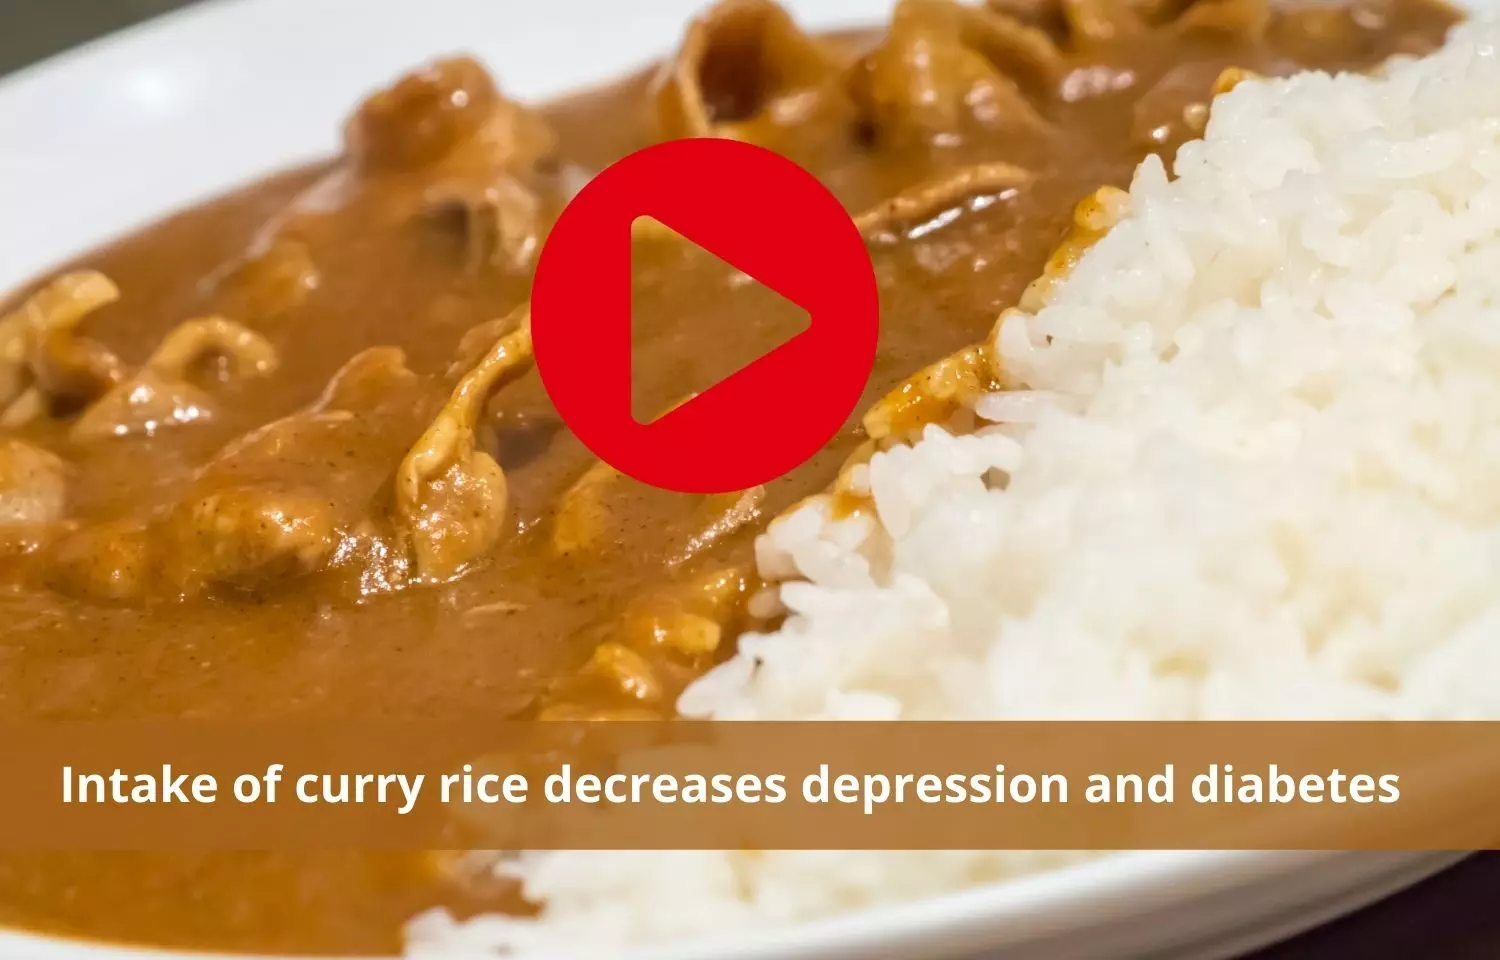 Curry rice in diet to decrease depression and diabetes